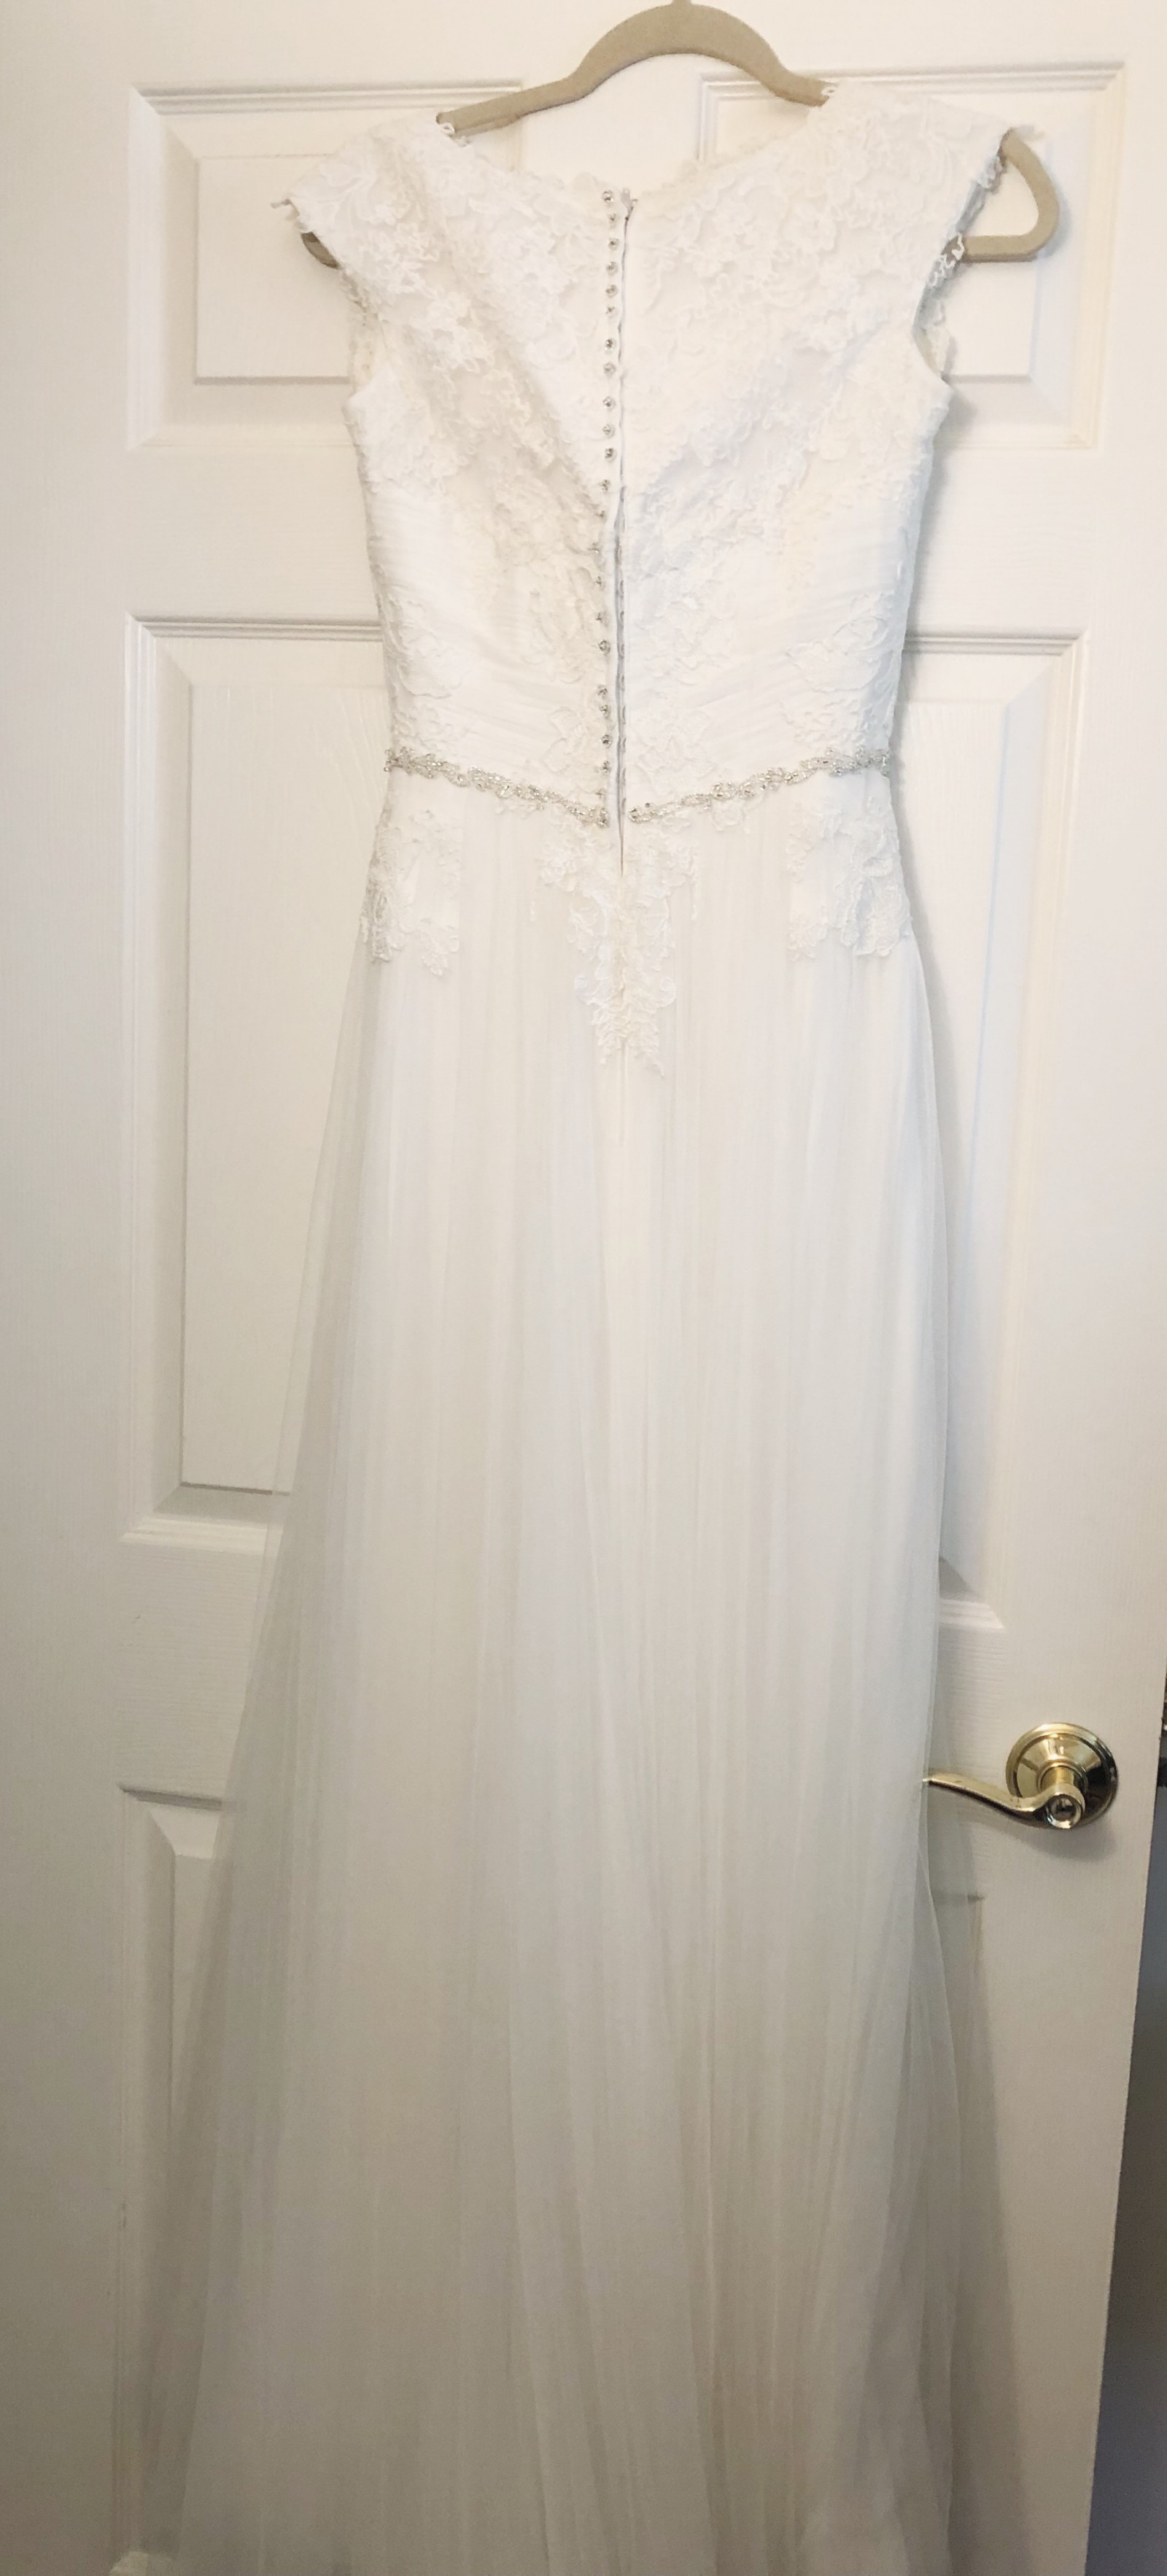 Maggie Sottero Patience Marie Used Wedding Dress Save 74% - Stillwhite